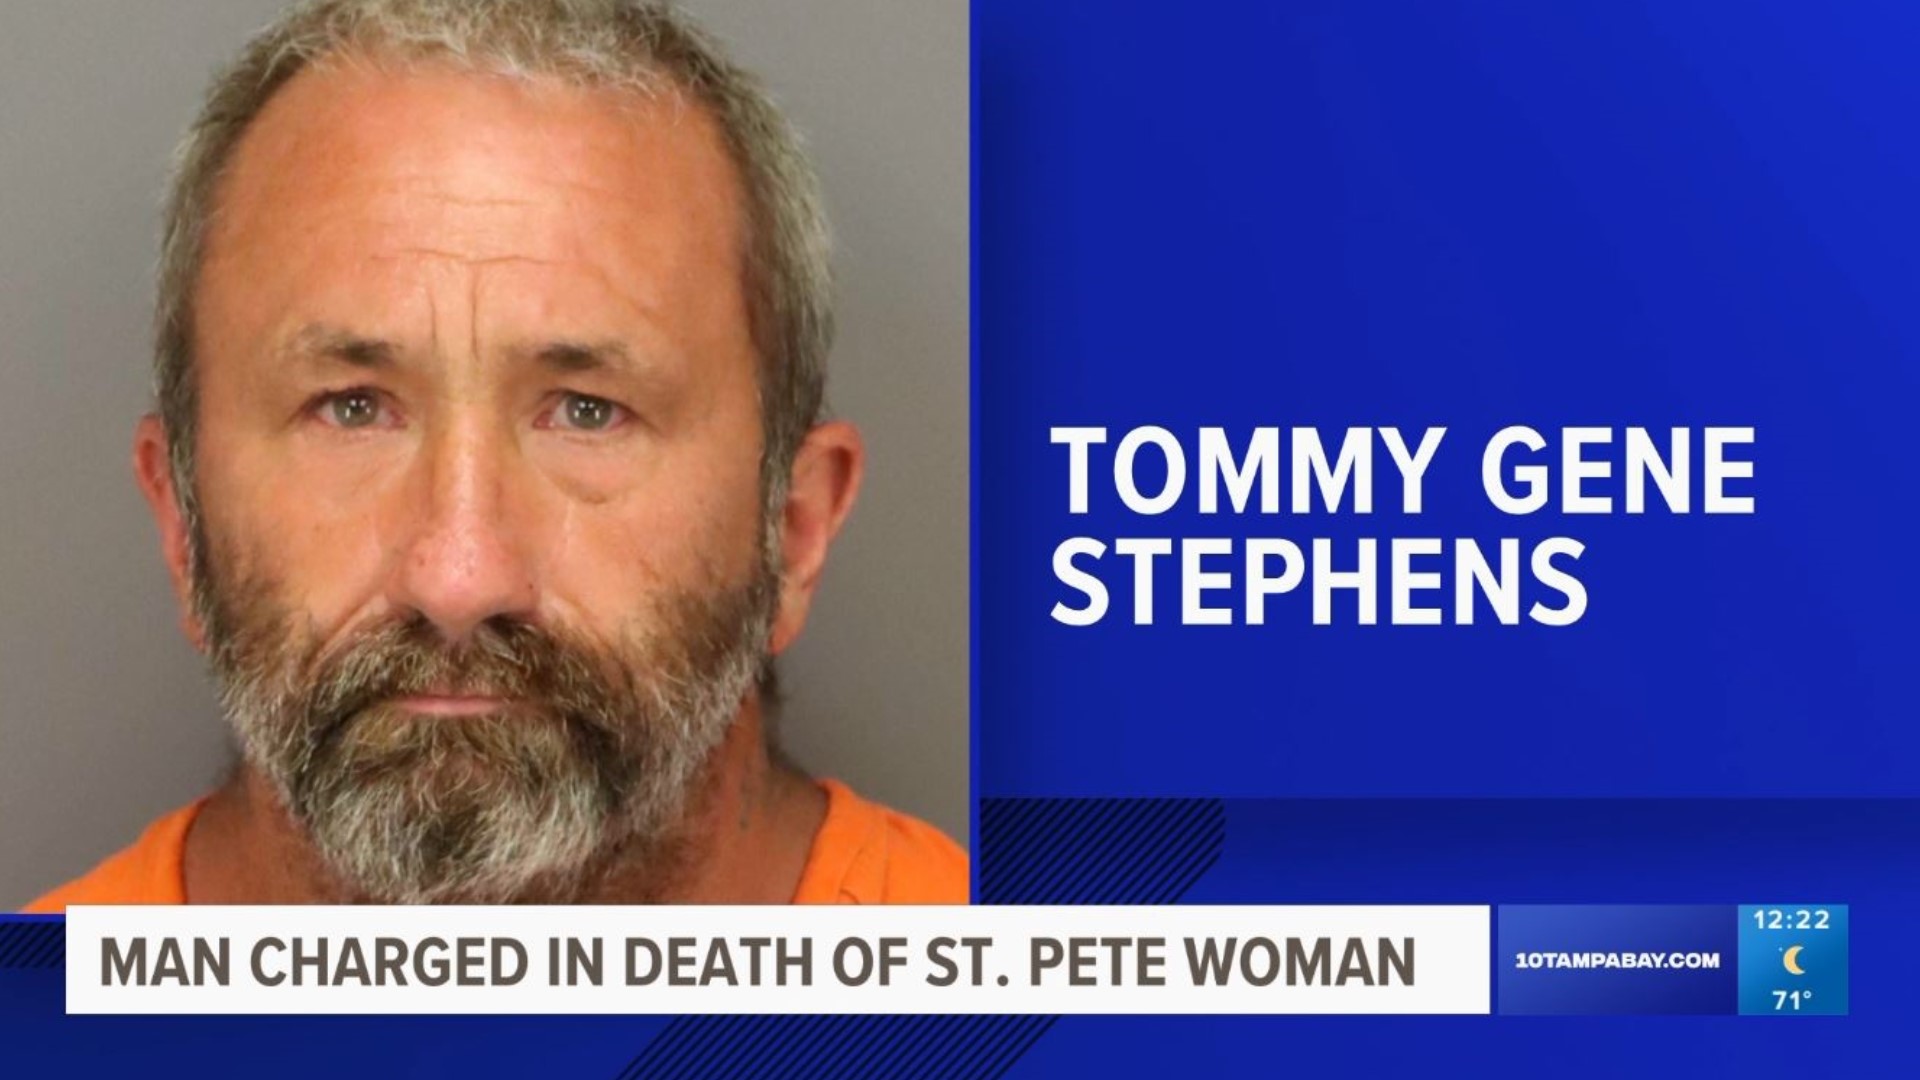 Tommy Stephens, 52, was taken into custody and is now facing a second-degree murder charge.